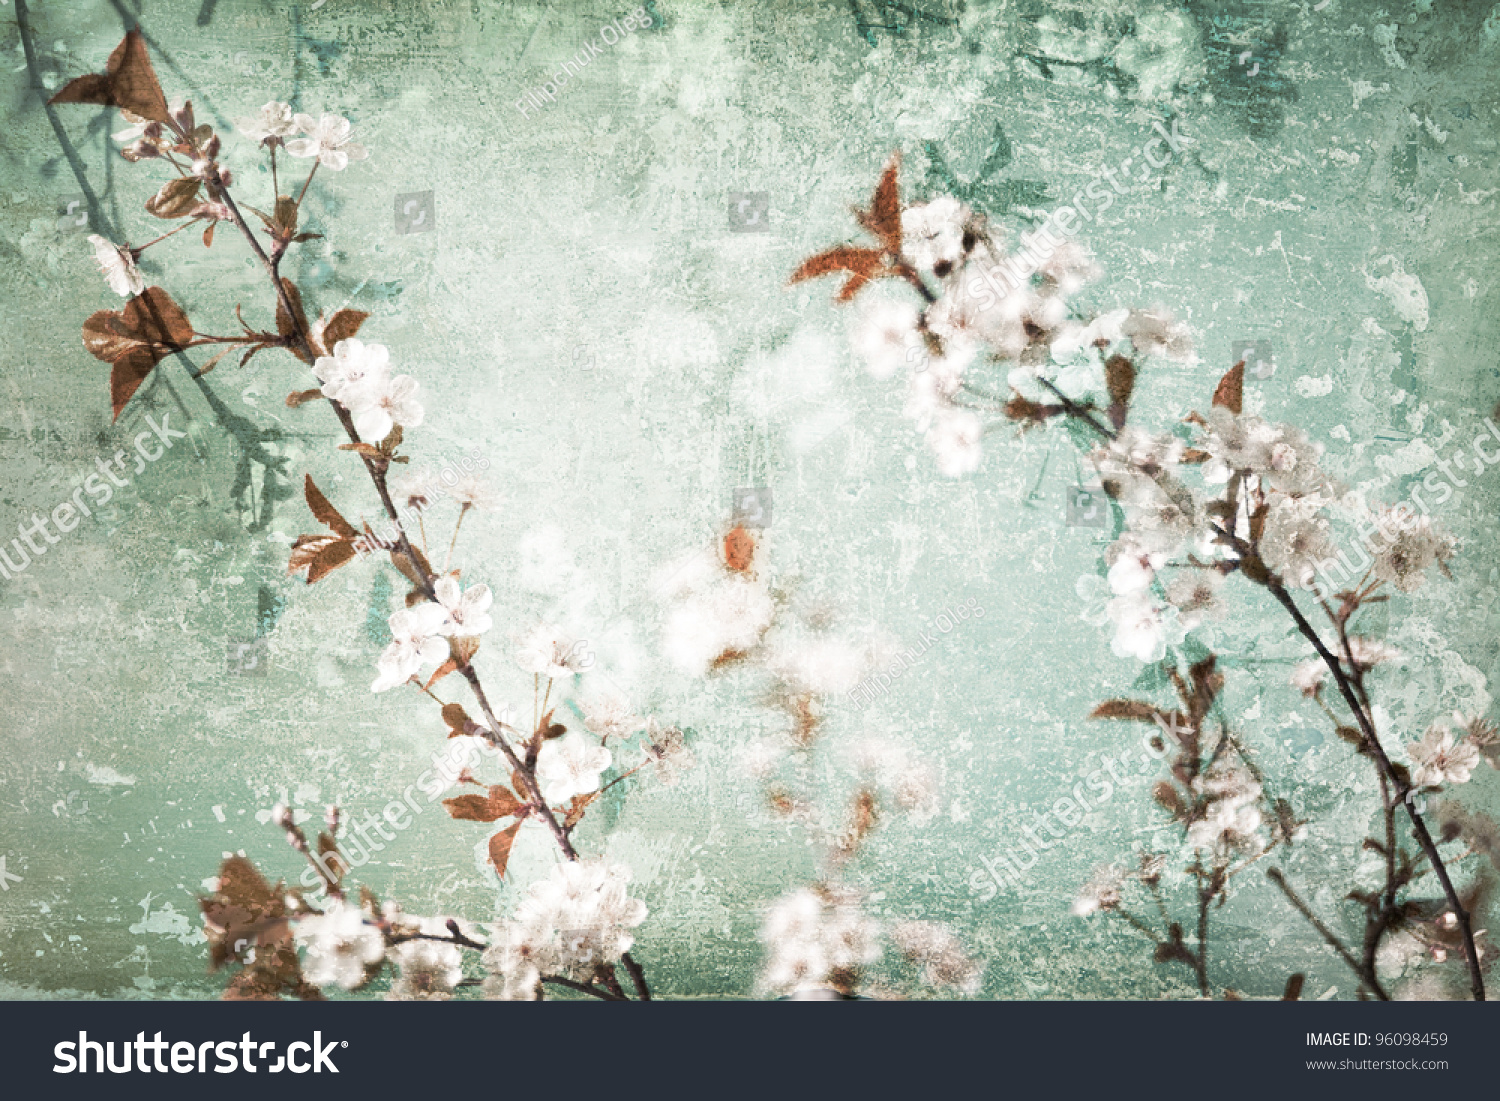 Grunge floral scratched textured background with flowers blossom #96098459